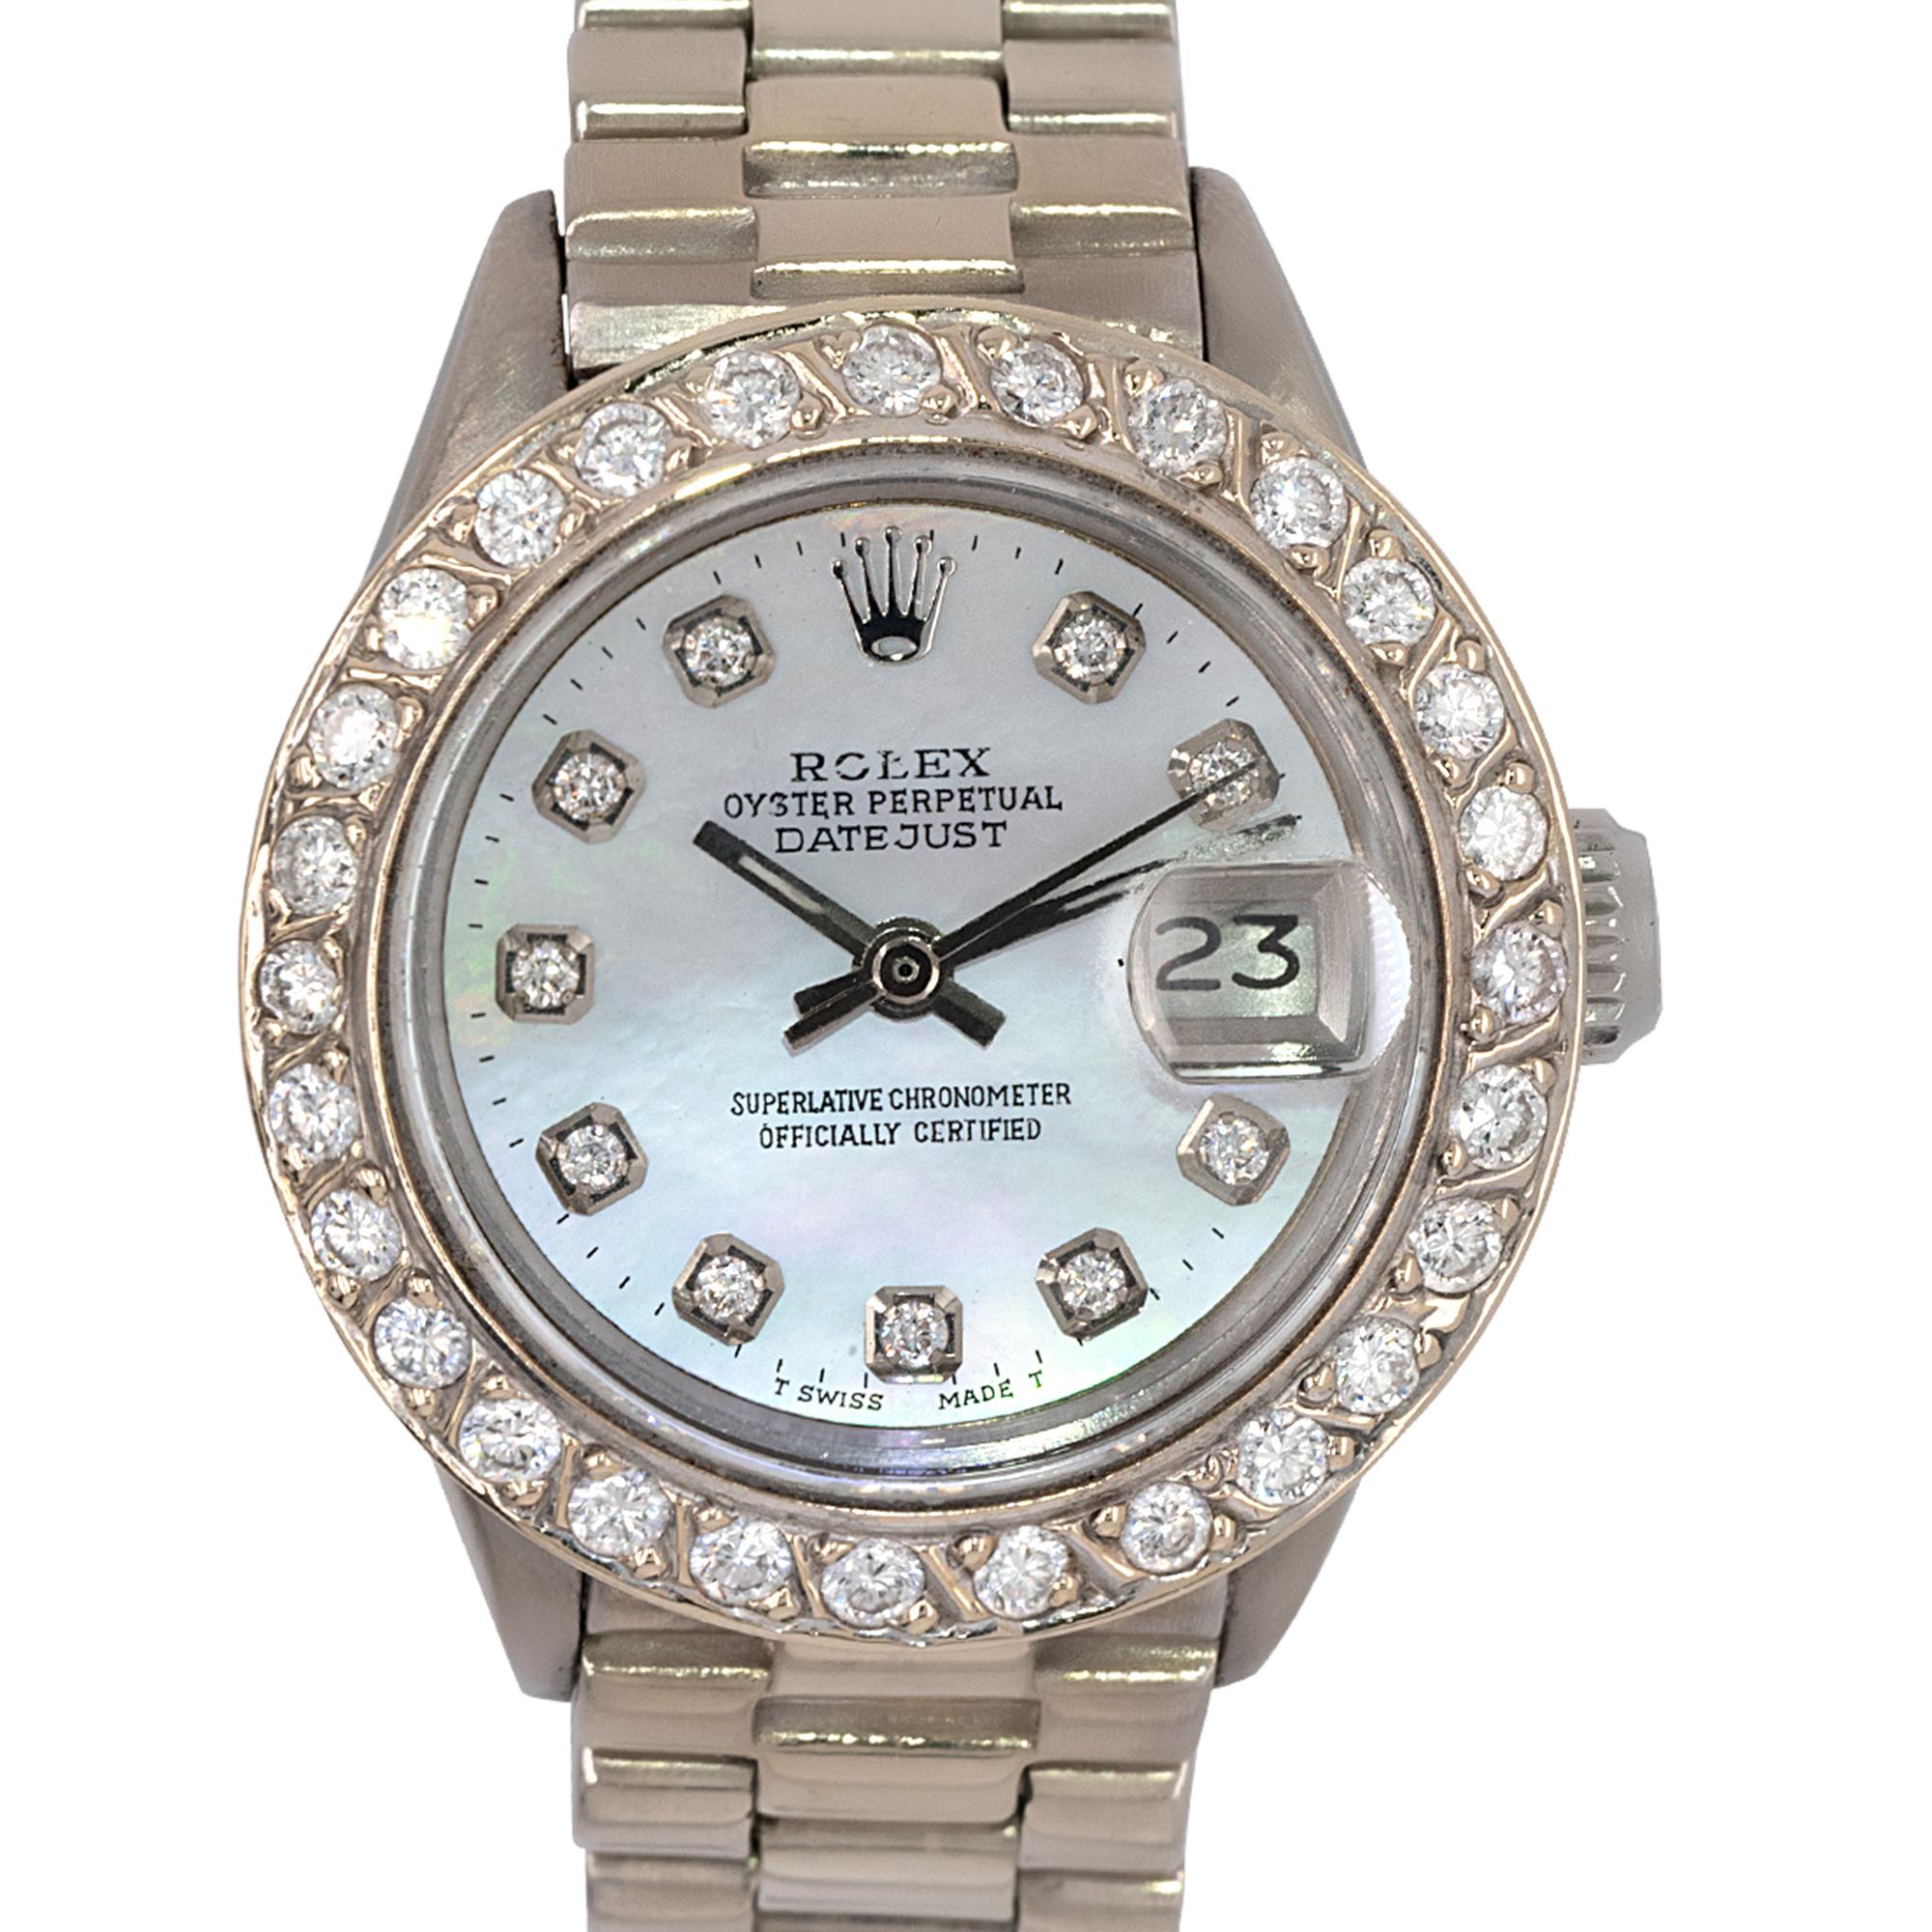 Rolex 6917 18k White Gold Datejust Mother of Pearl Dial and Diamond Bezel Ladies Watch

Indulge in the timeless beauty of the Rolex 6917 Datejust watch, a true symbol of refined luxury. Crafted with meticulous attention to detail, this exquisite